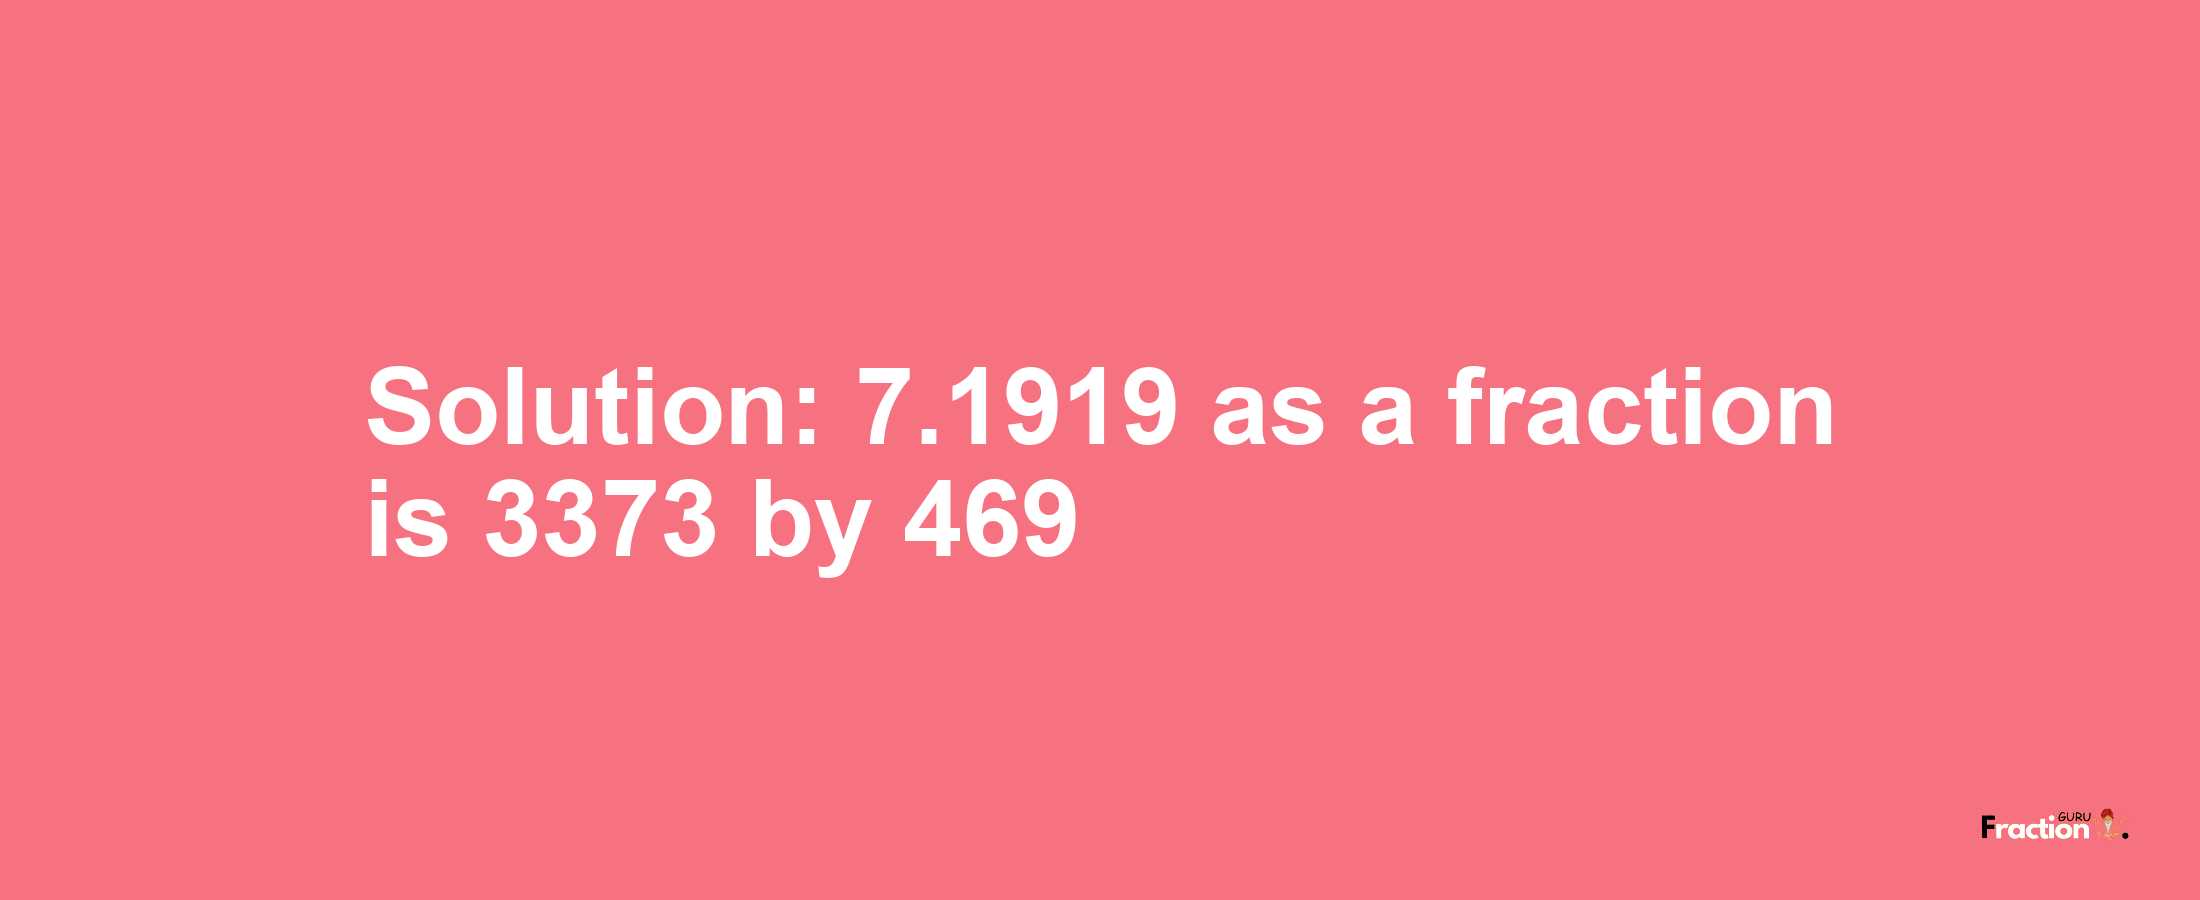 Solution:7.1919 as a fraction is 3373/469